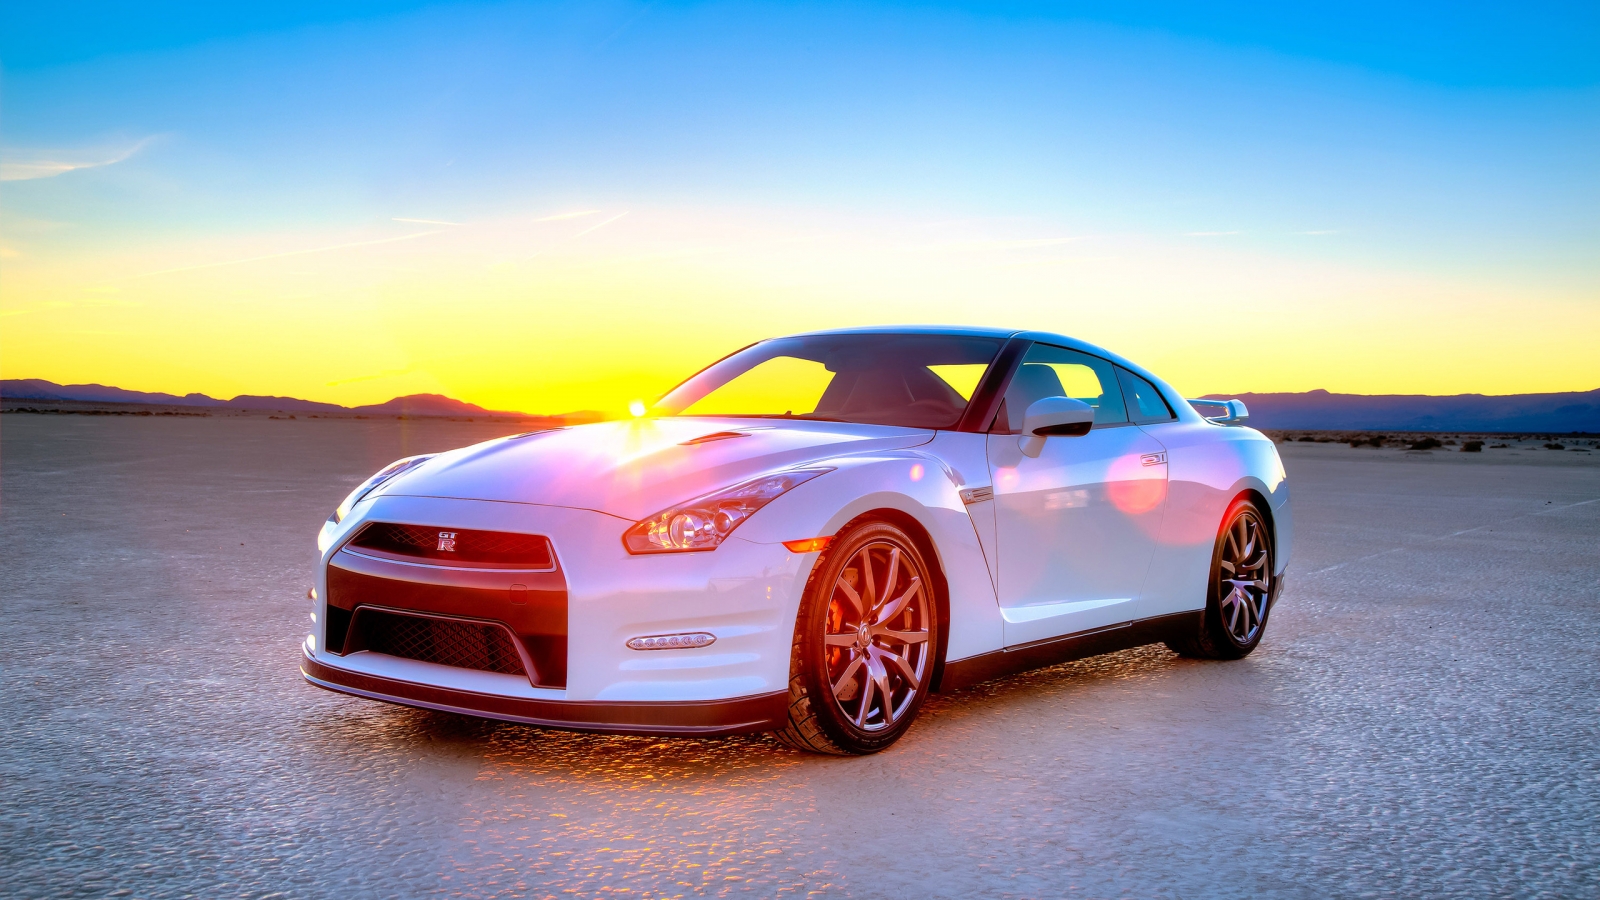 White Nissan GT-R 2014 Edition for 1600 x 900 HDTV resolution